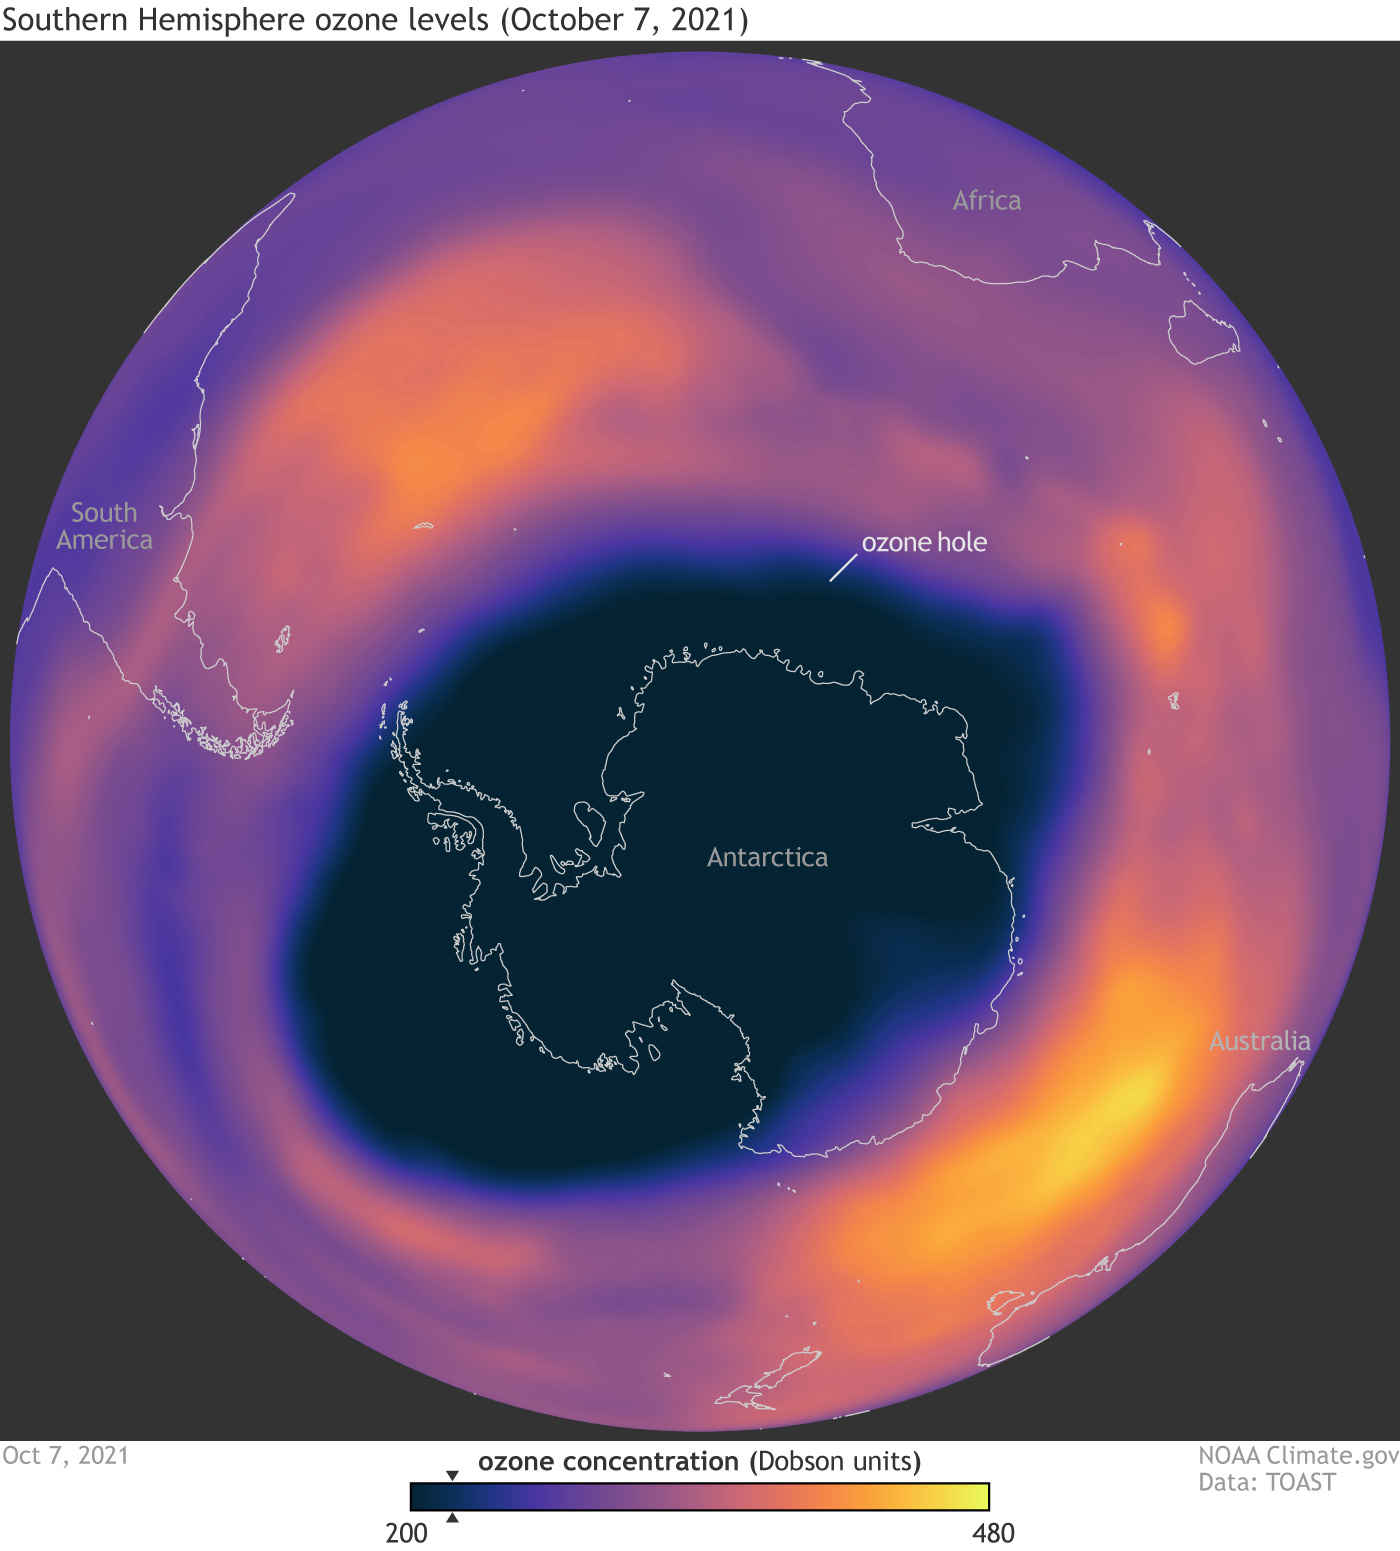 This visualization depicts the ozone hole over Antarctica at its maximum extent on October 7. 2021. Scientists define the "ozone hole" as the area in which ozone levels are depleted below 220 Dobson Units (dark blue, marked with black triangle on color bar). 